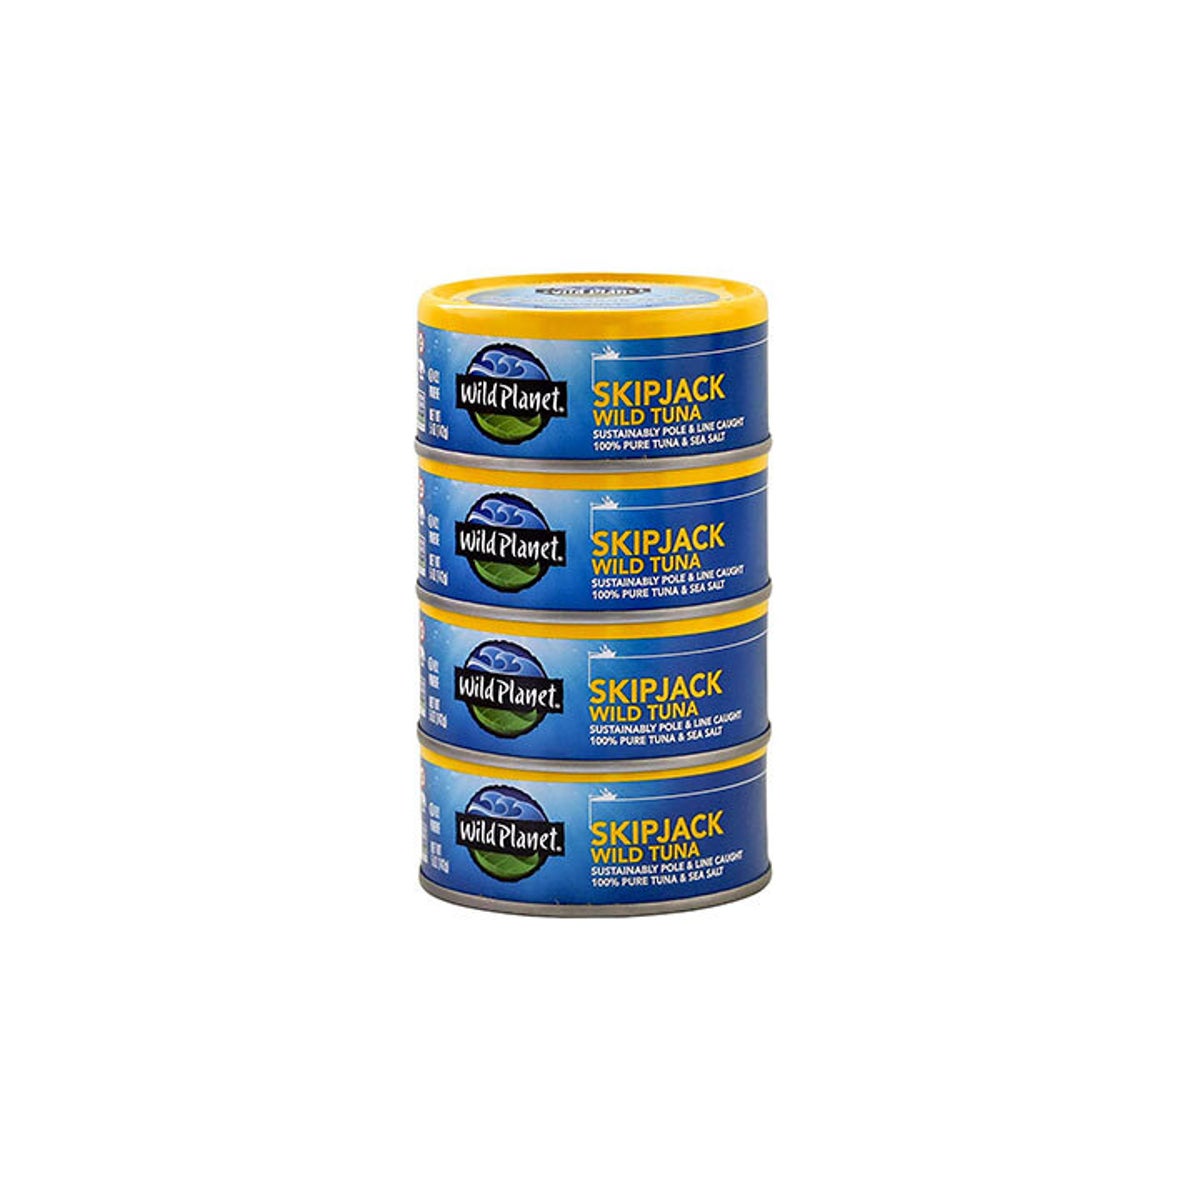 The Best Canned Tuna in 2022